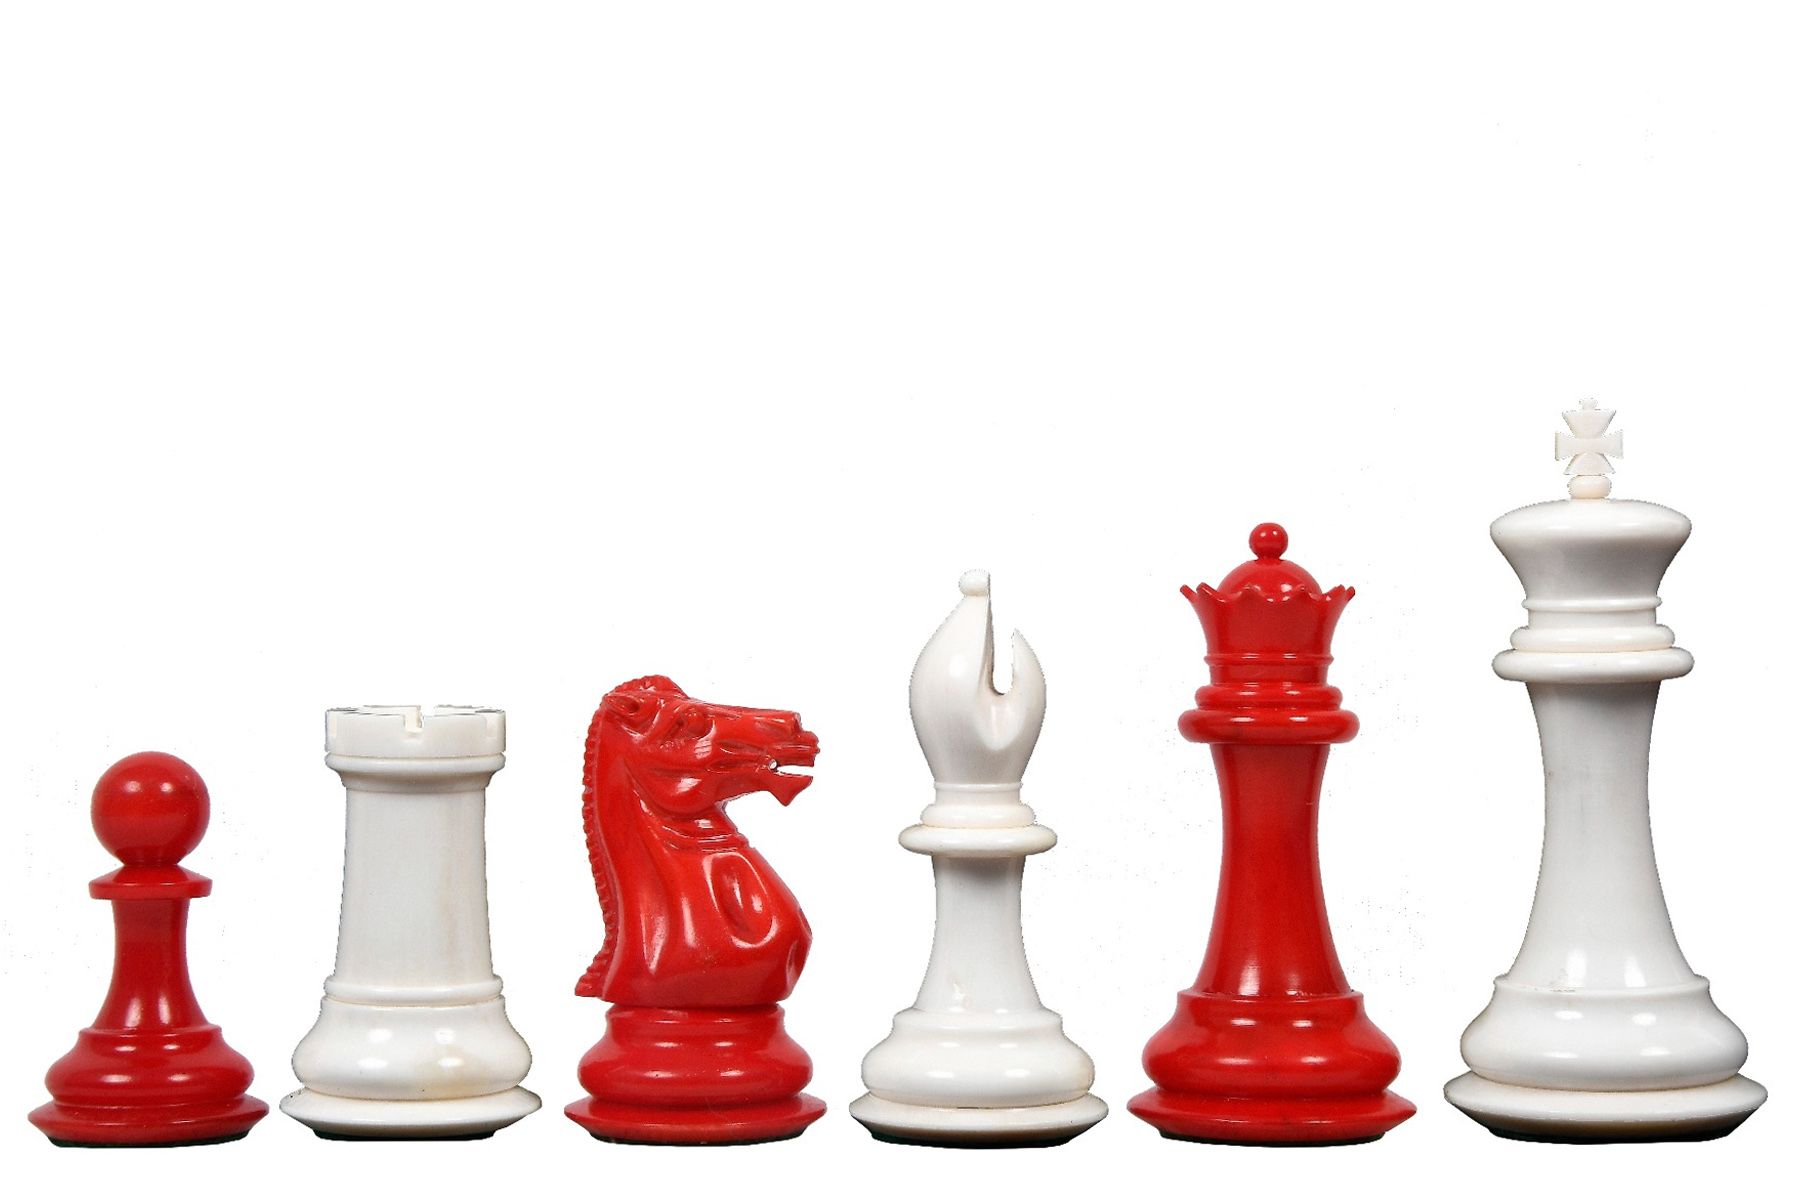 Details about   Handmade Chess Pieces Real Carving Camel Bone 